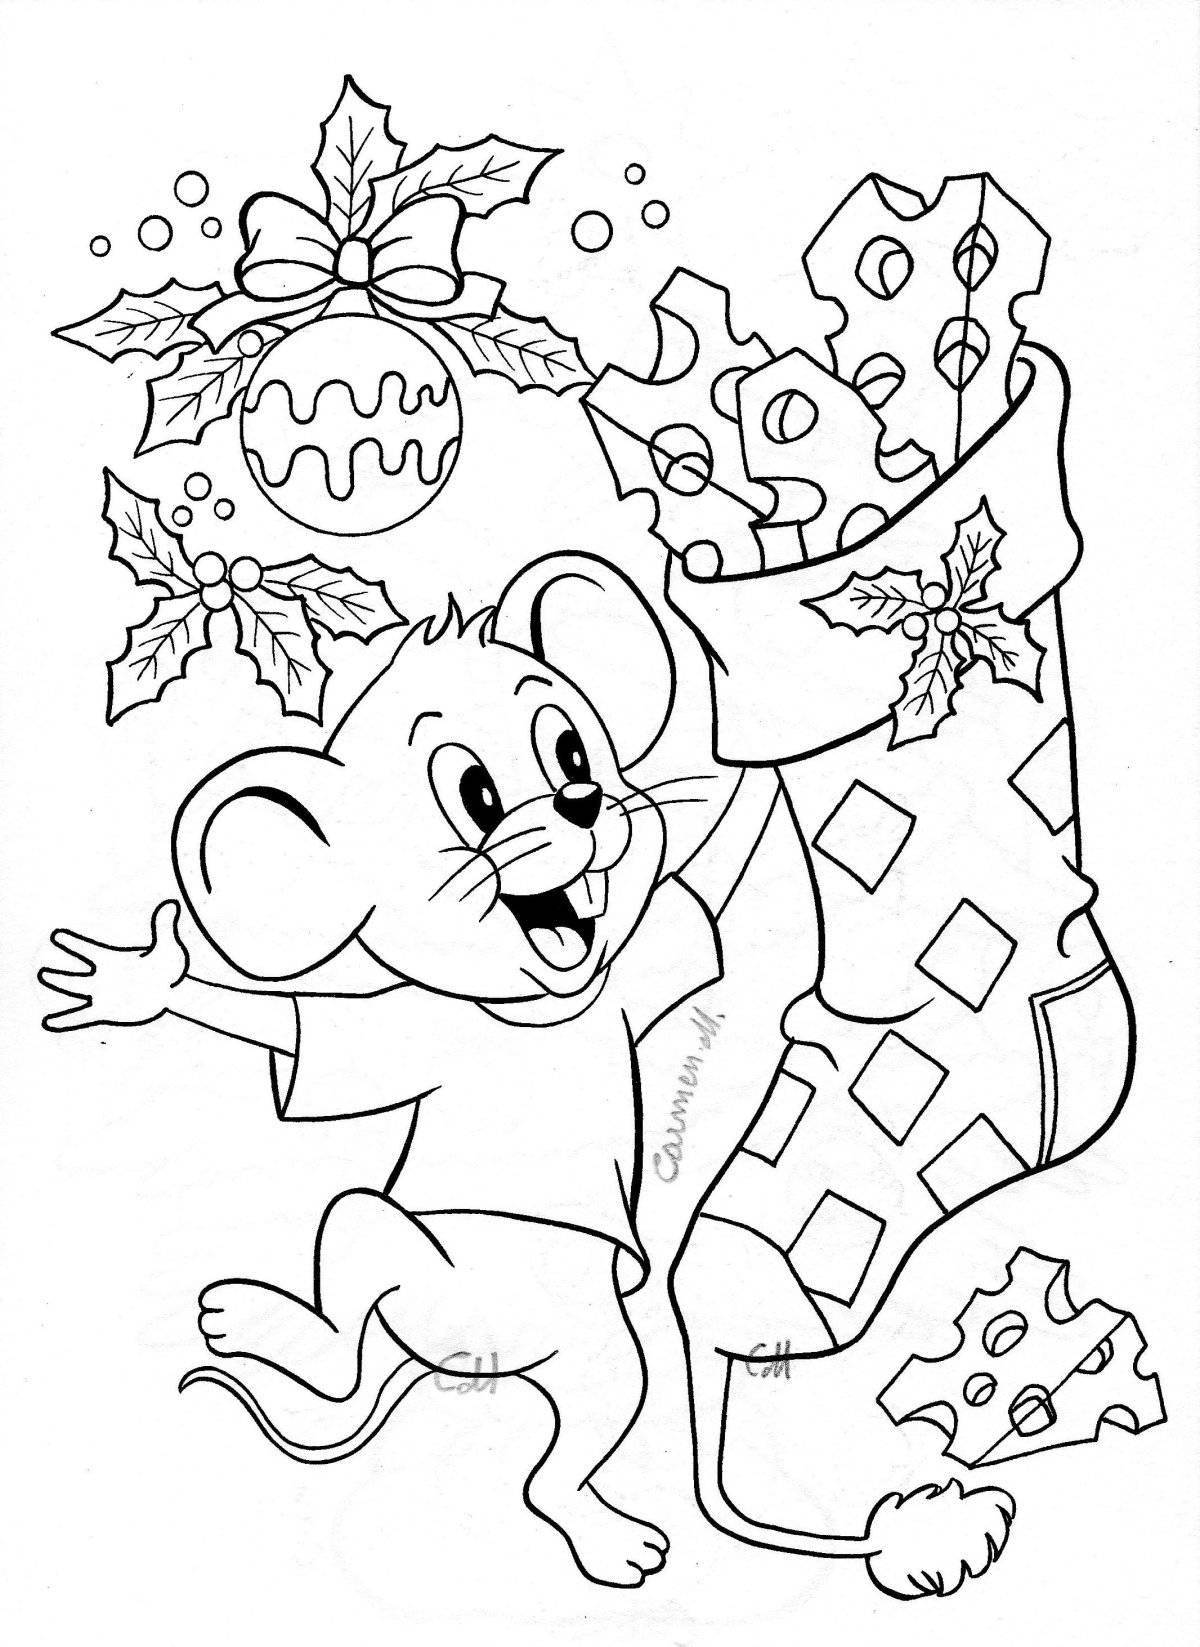 Holiday old new year coloring book for kids